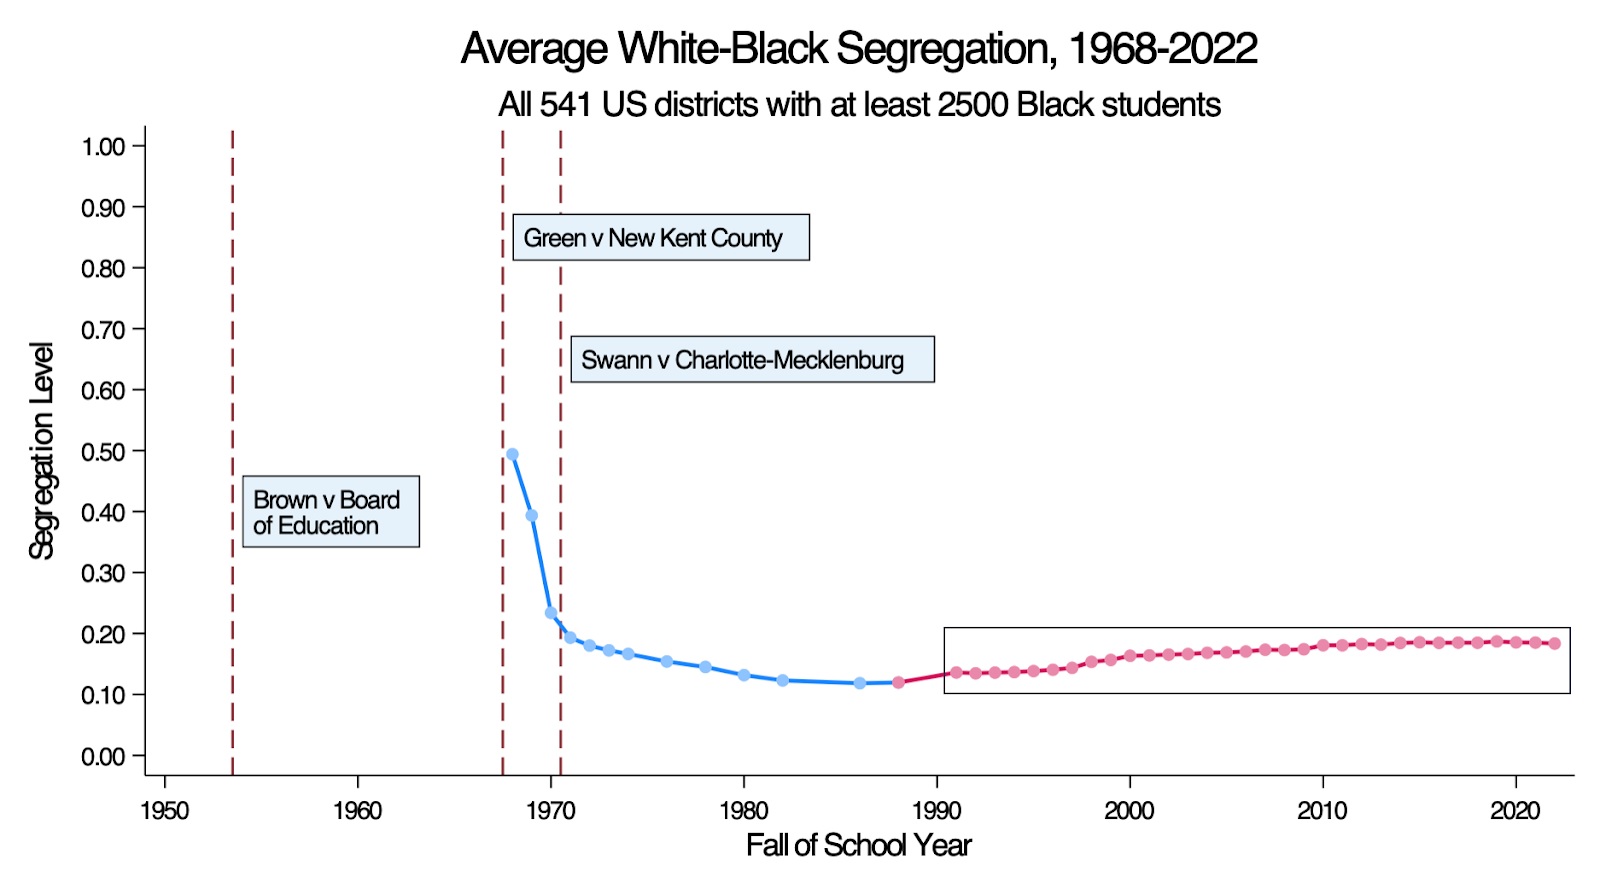 Schools are more segregated than 30 years ago_graphic: graph of segregation levels from 1950 to now with relevant court cases marked on timeline